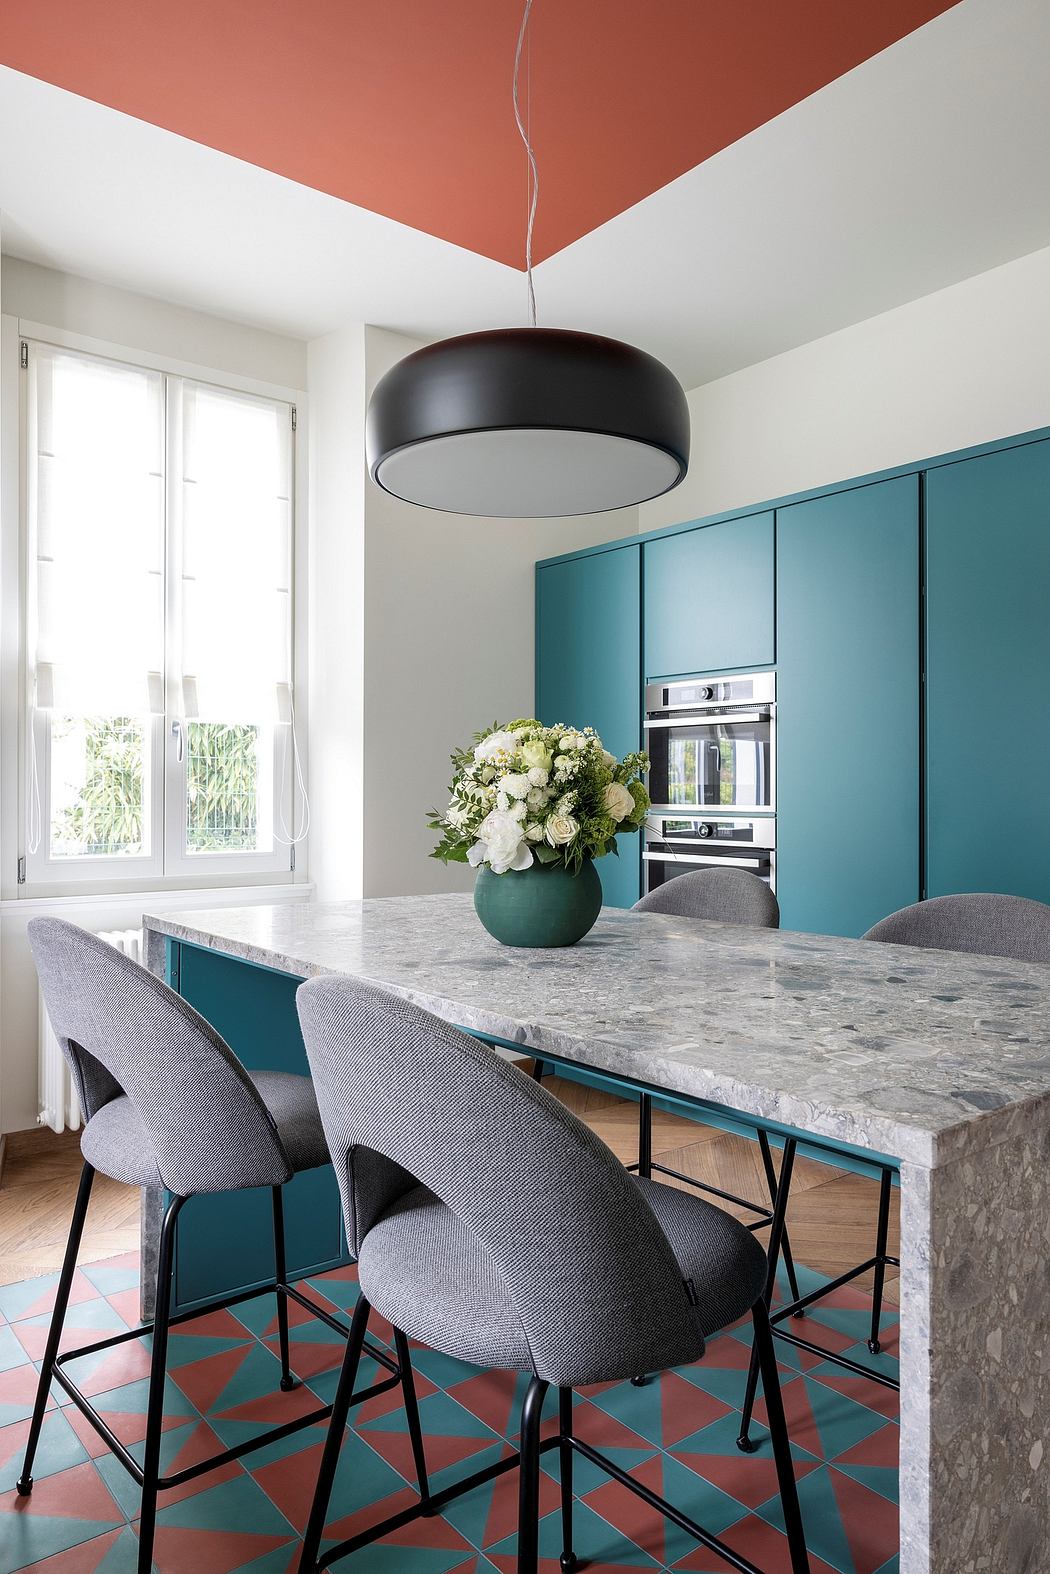 Sleek modern kitchen with bold teal cabinets, marble countertop, and stylish pendant light.